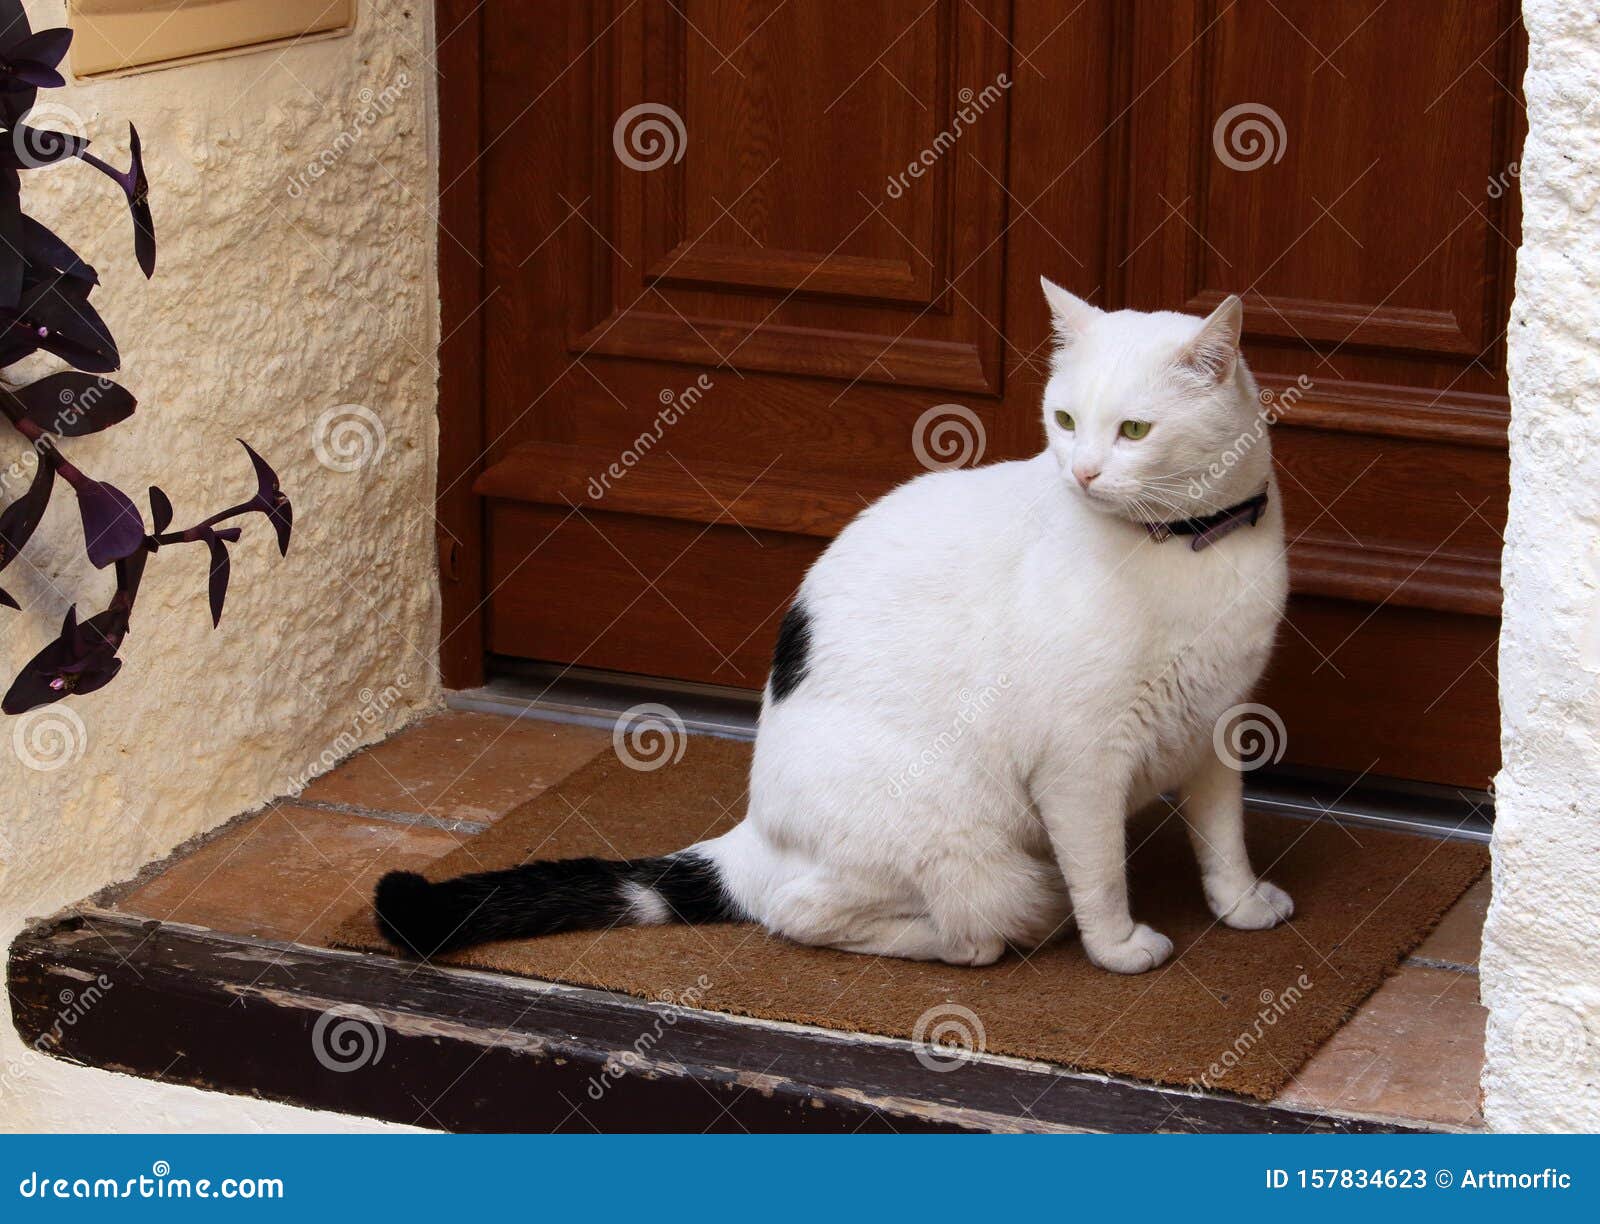 White Cat Sitting On The Stairs Near The Door Stock Image Image of